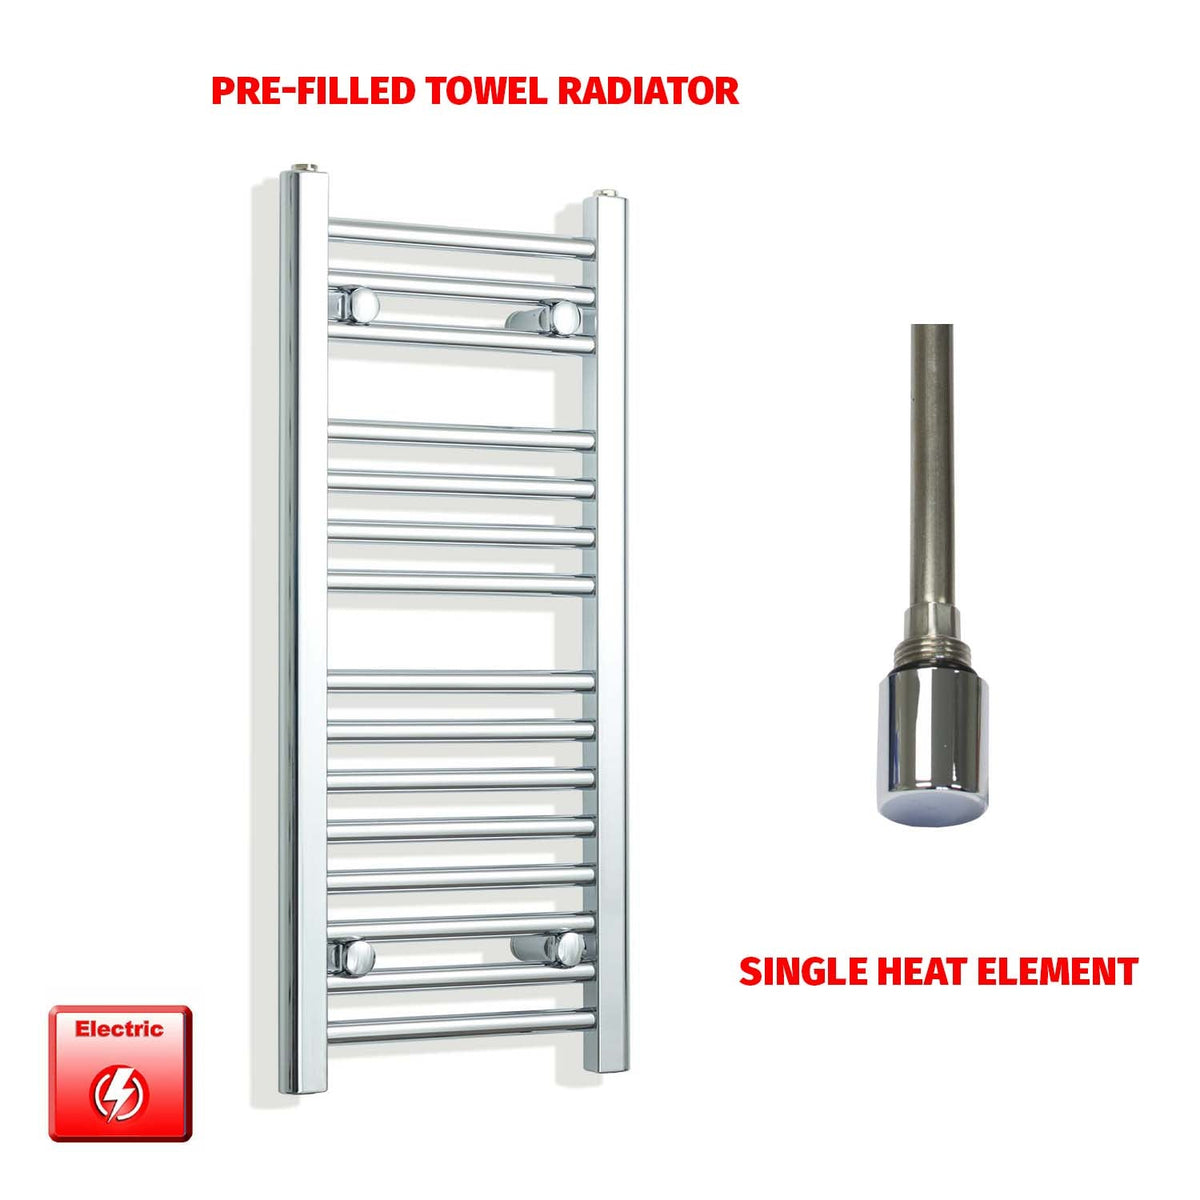 800mm High 350mm Wide Pre-Filled Electric Heated Towel Rail Radiator Straight Chrome Single heat element no timer